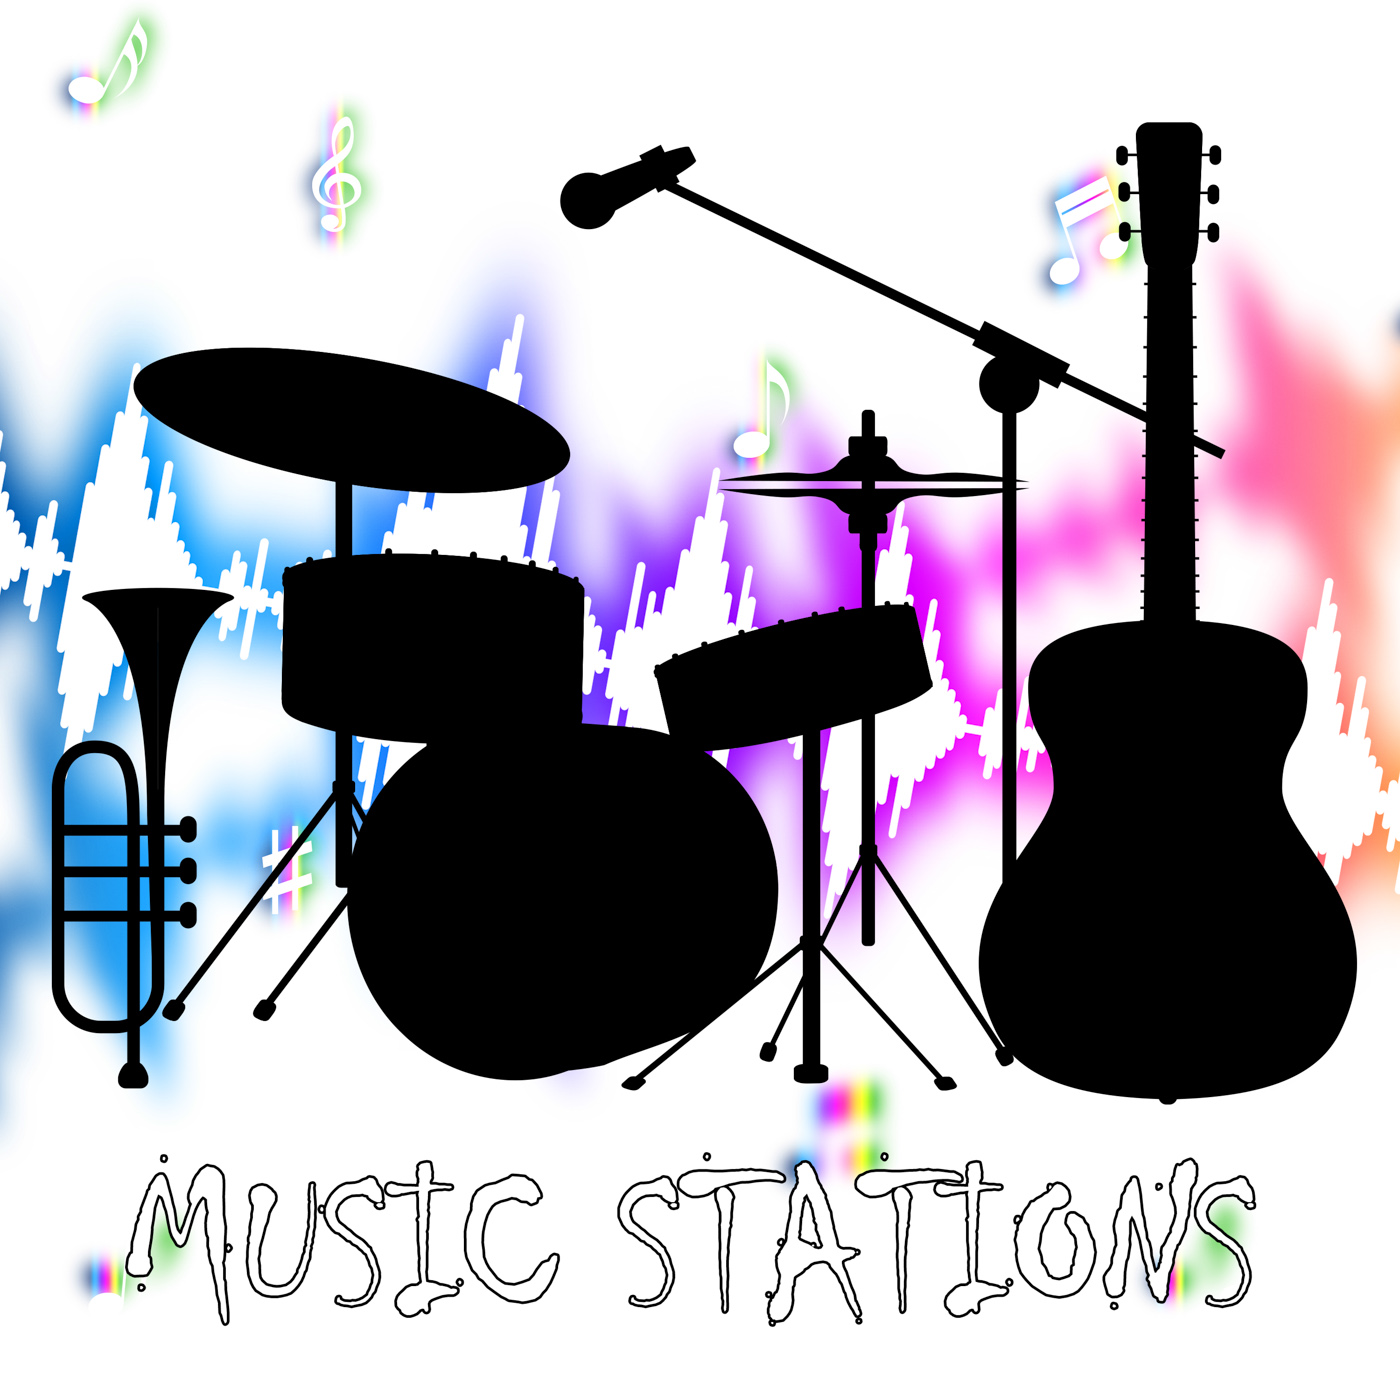 Music stations shows sound tracks and audio photo